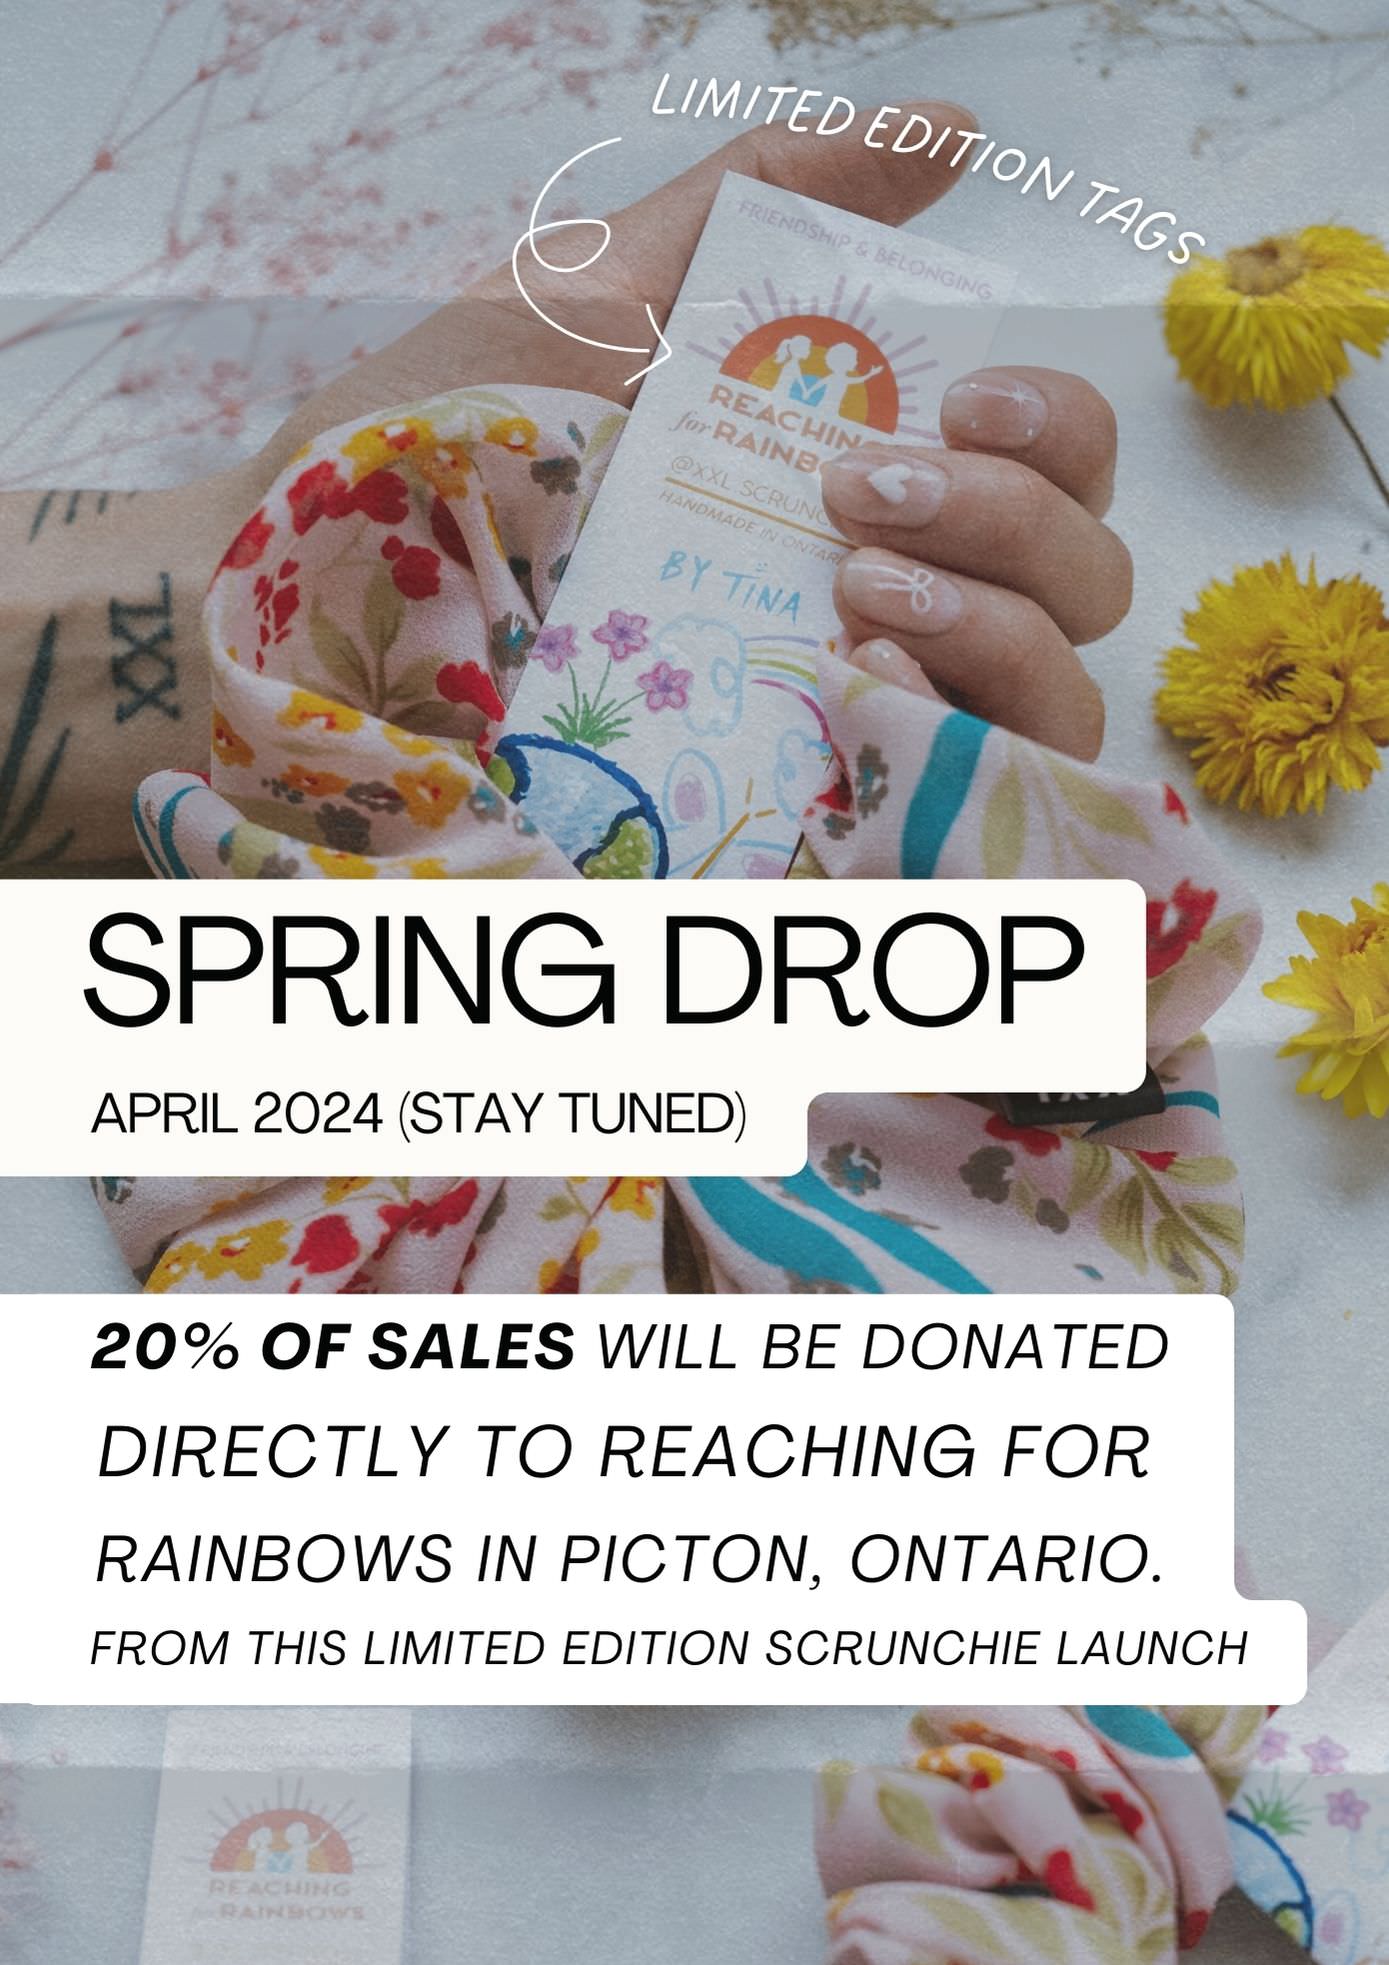 Limited edition Spring Drop Reaching For Rainbows Picton Ontario Charity Collaboration with XXL Scrunchie to donate 20% proceeds Picton Ontario Prince Edward County Small Business Owner